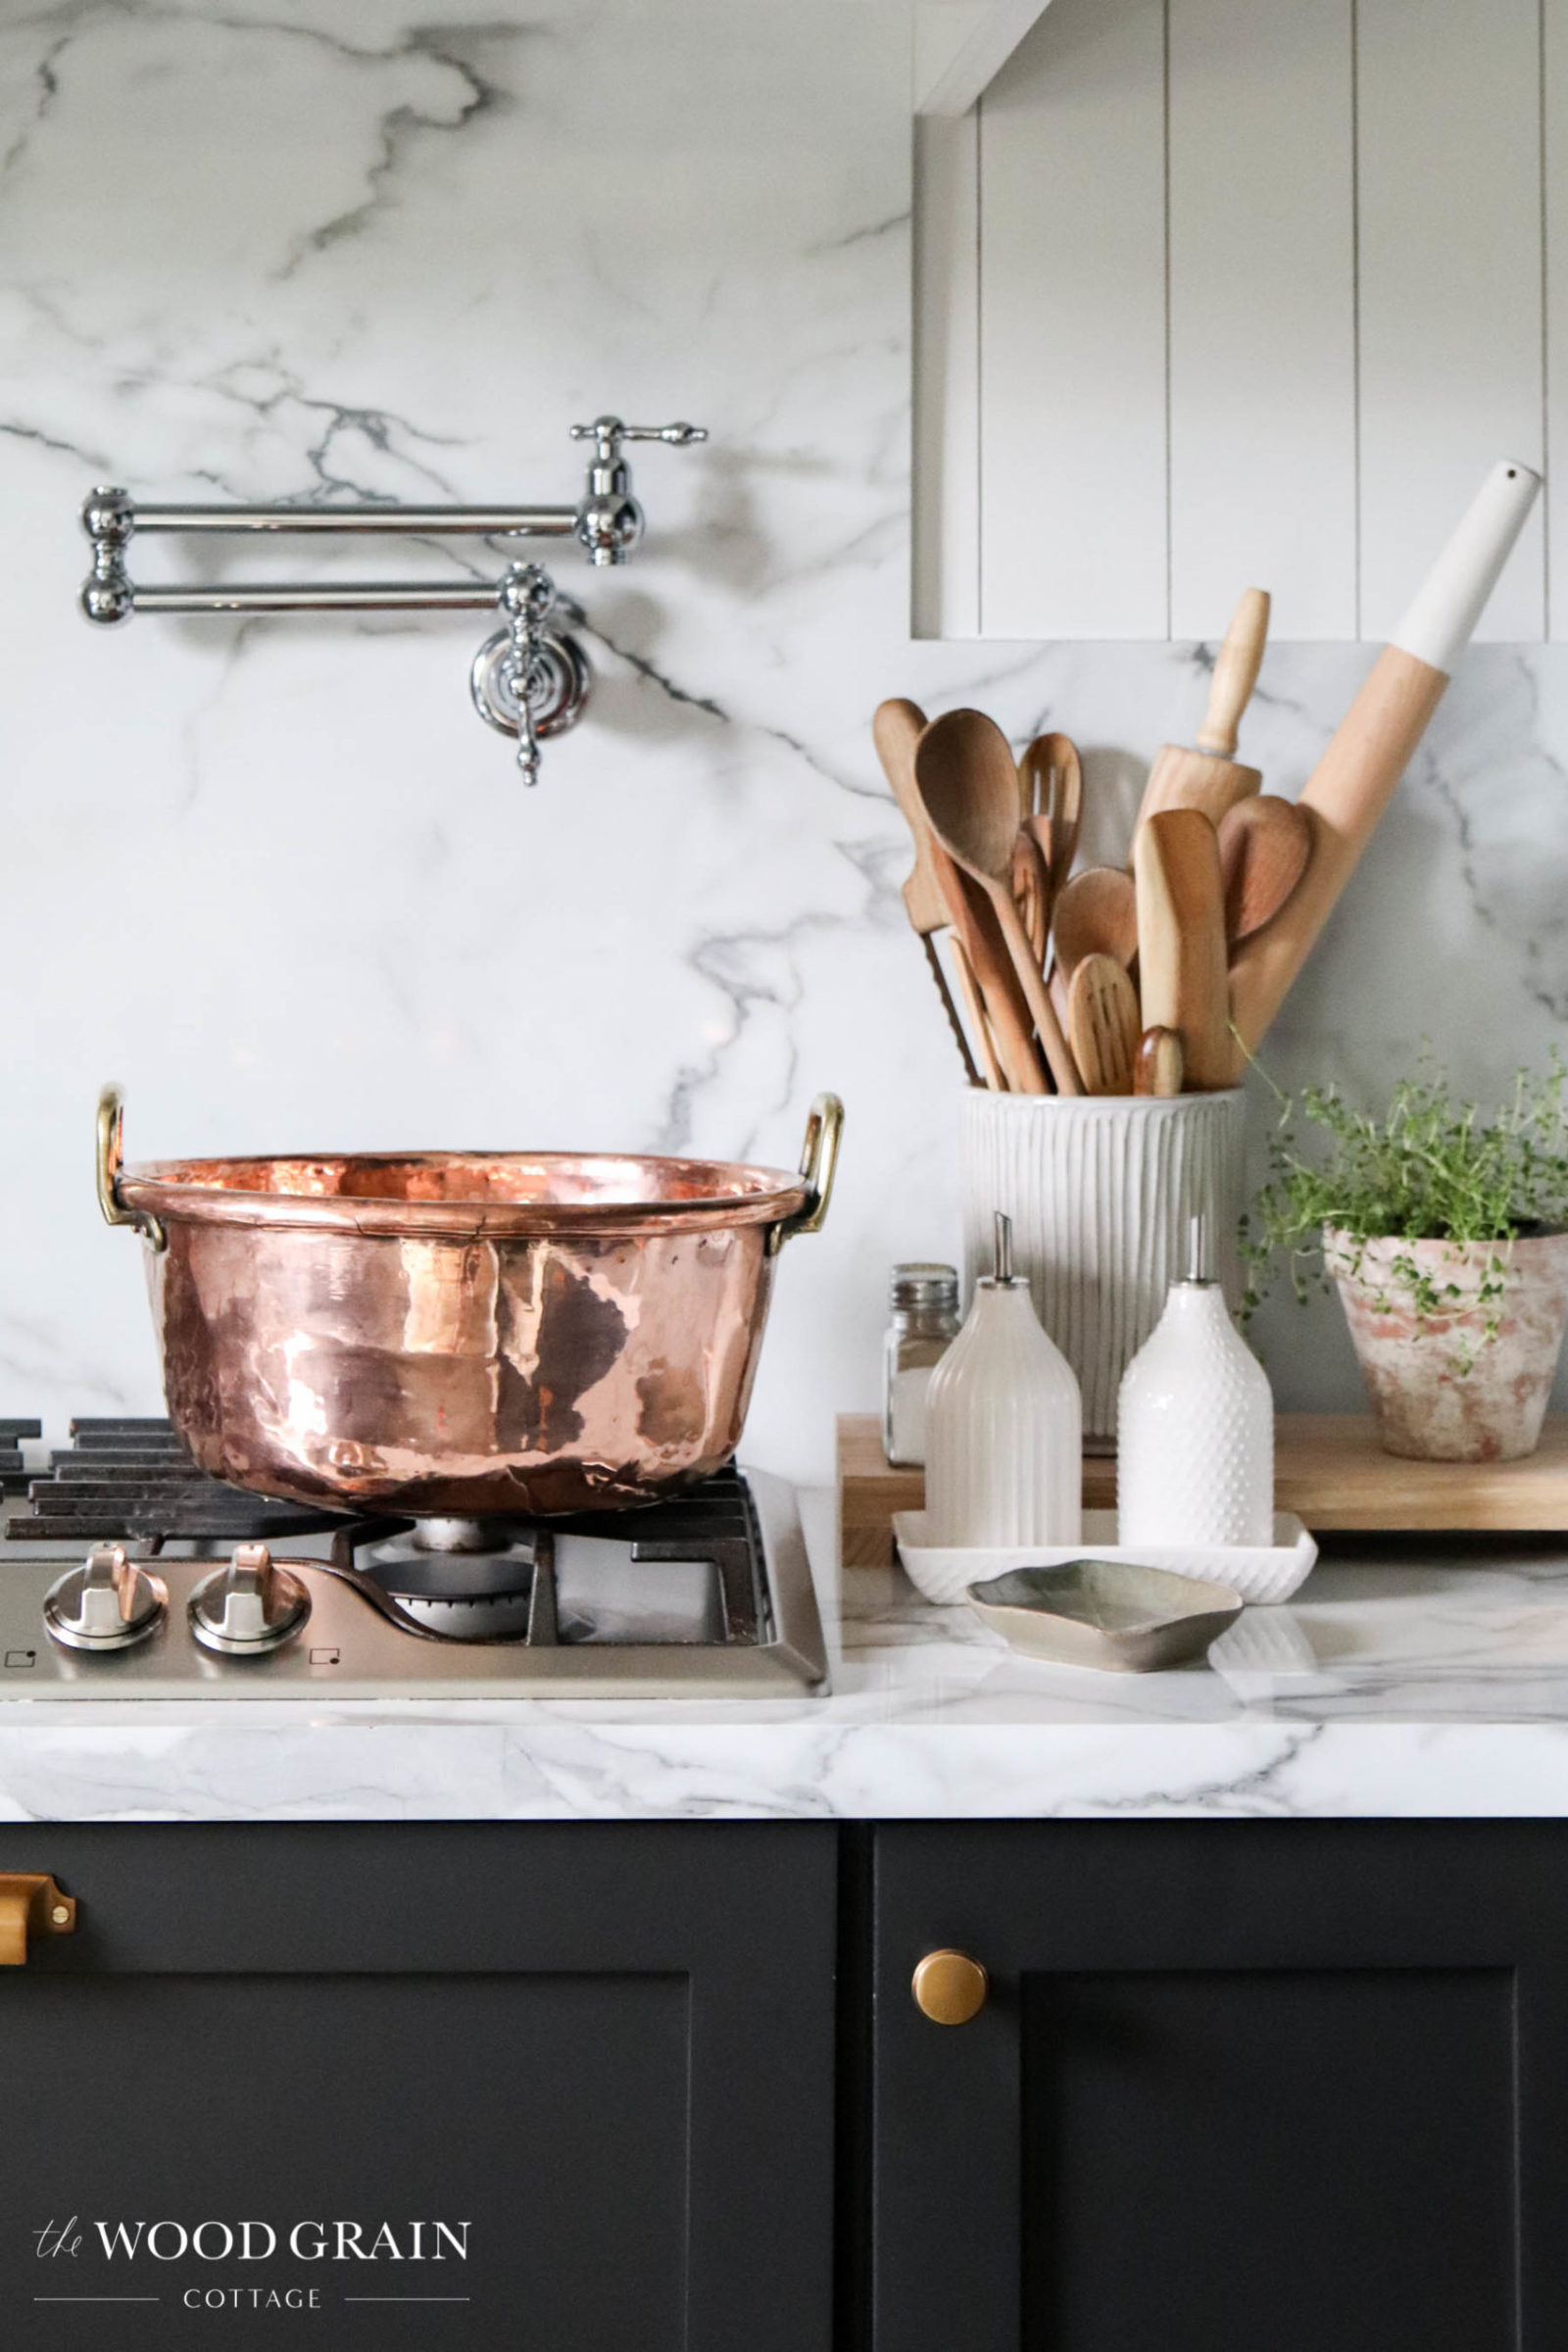 A picture showing the copper jam pan in my kitchen.